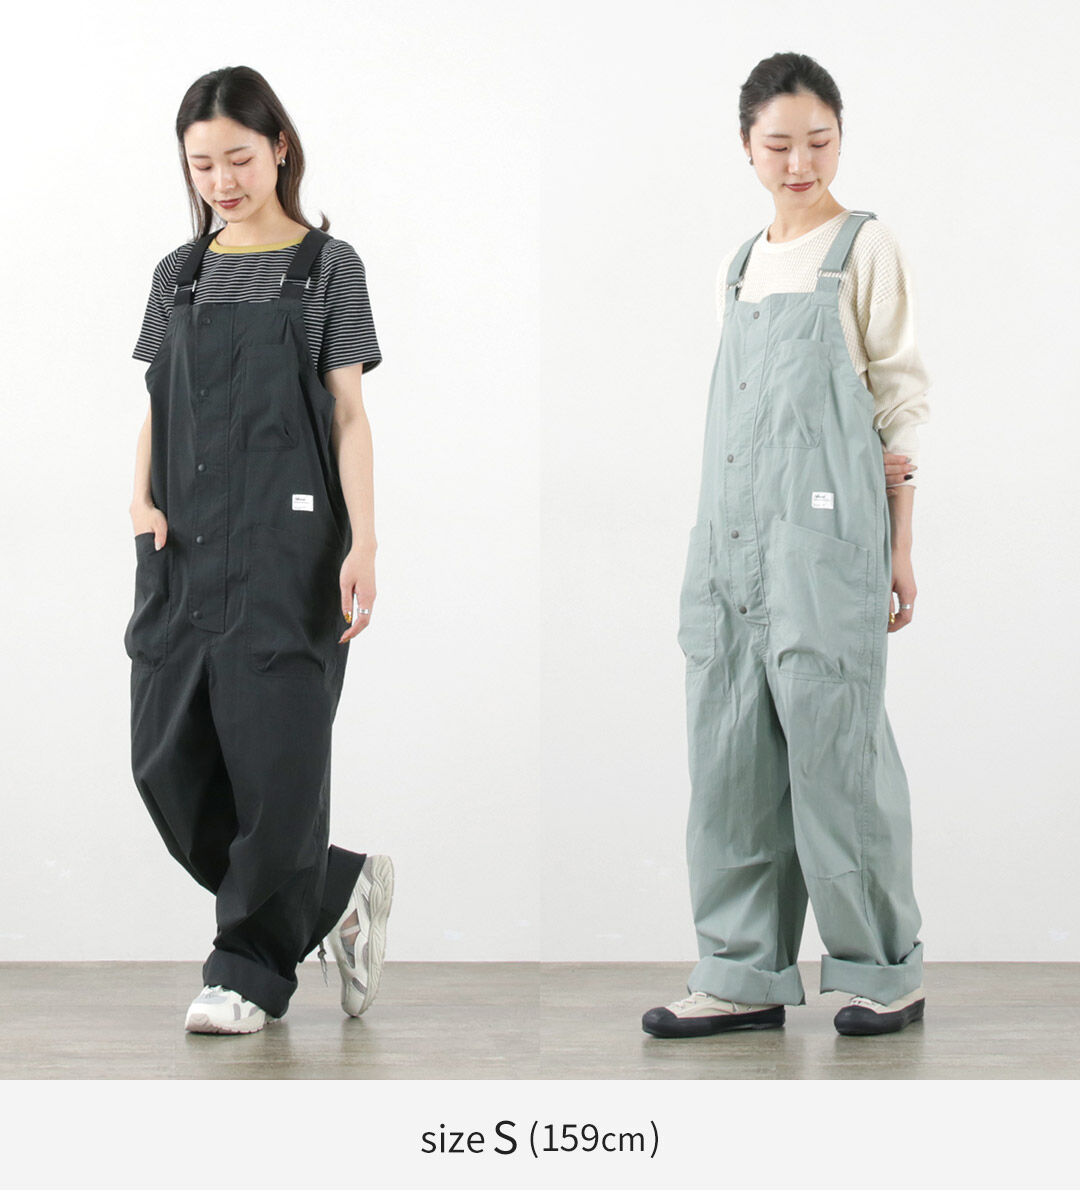 Ripstop Field Overalls Fire-resistant